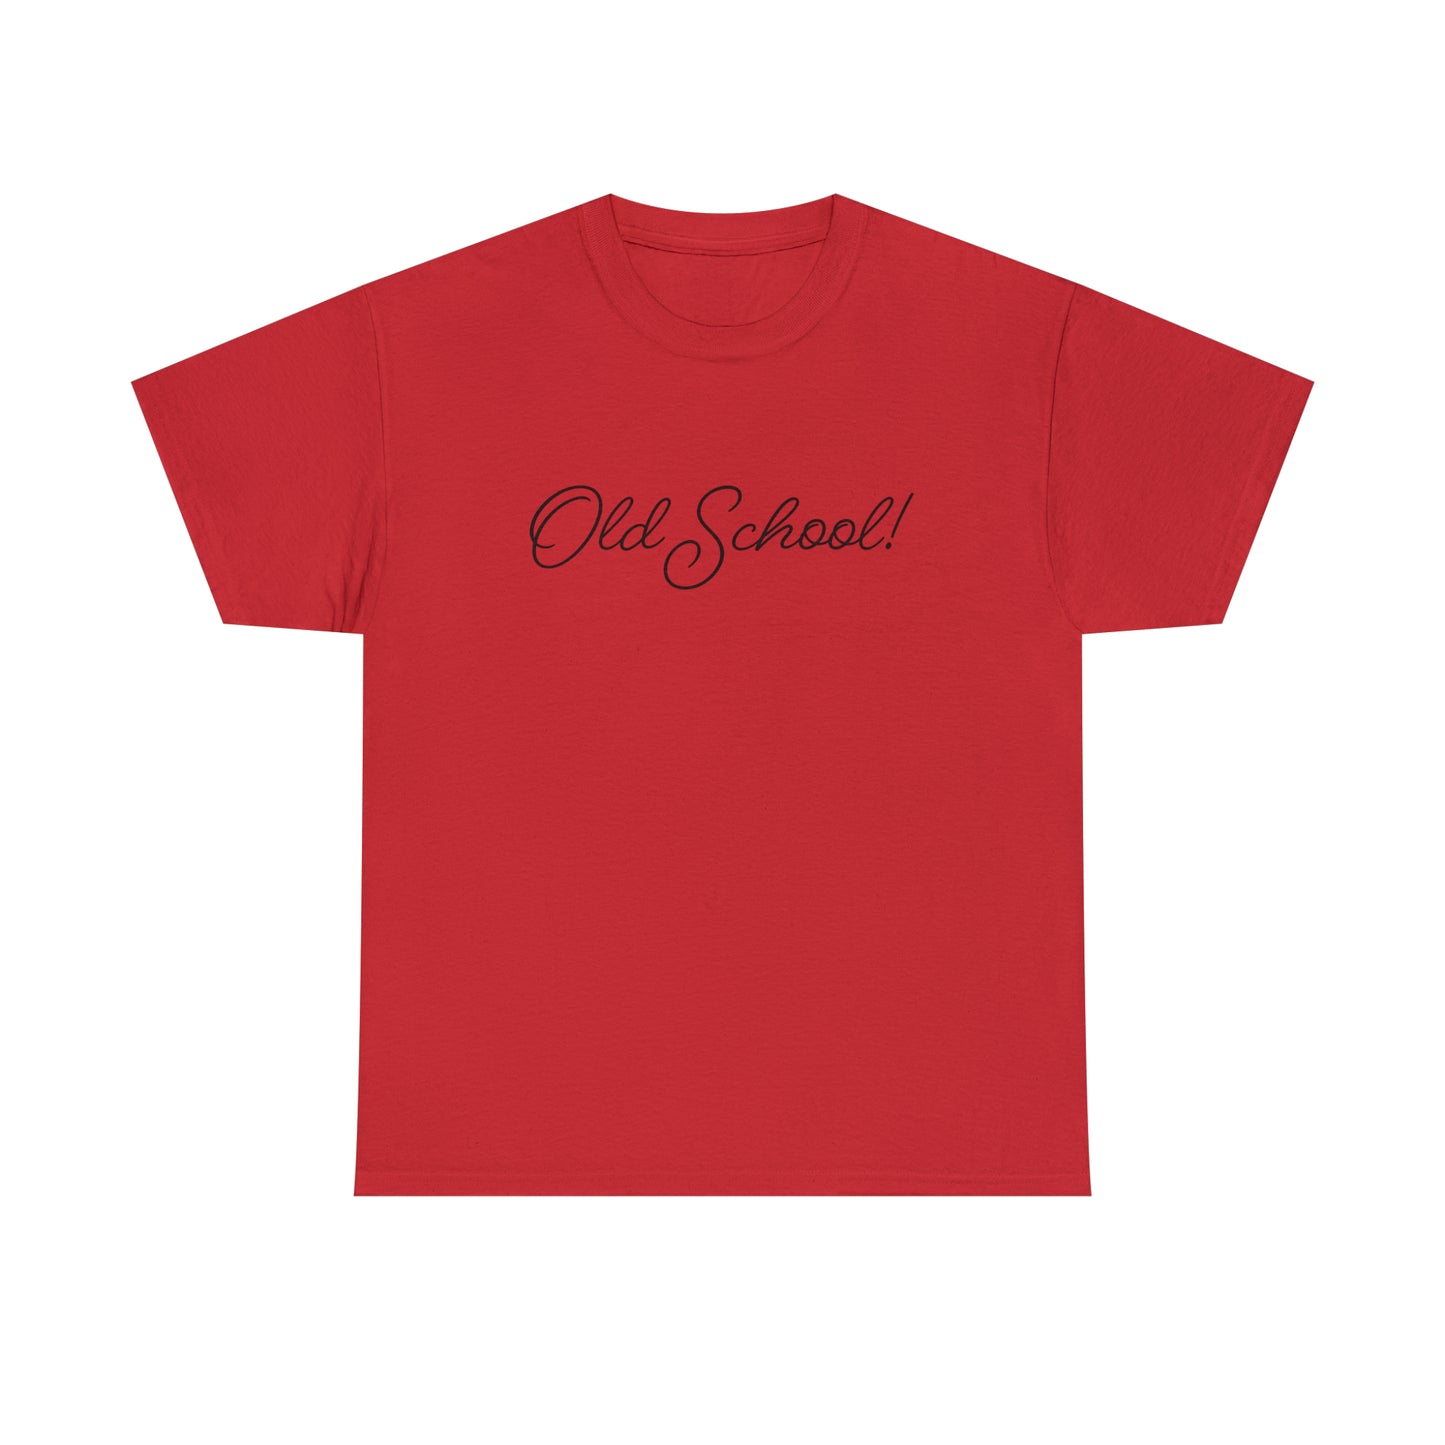 Old School T-Shirt For Retro TShirt For Smart People T Shirt For Baby Boomer T Shirt With Cursive Shirt For Education Gift